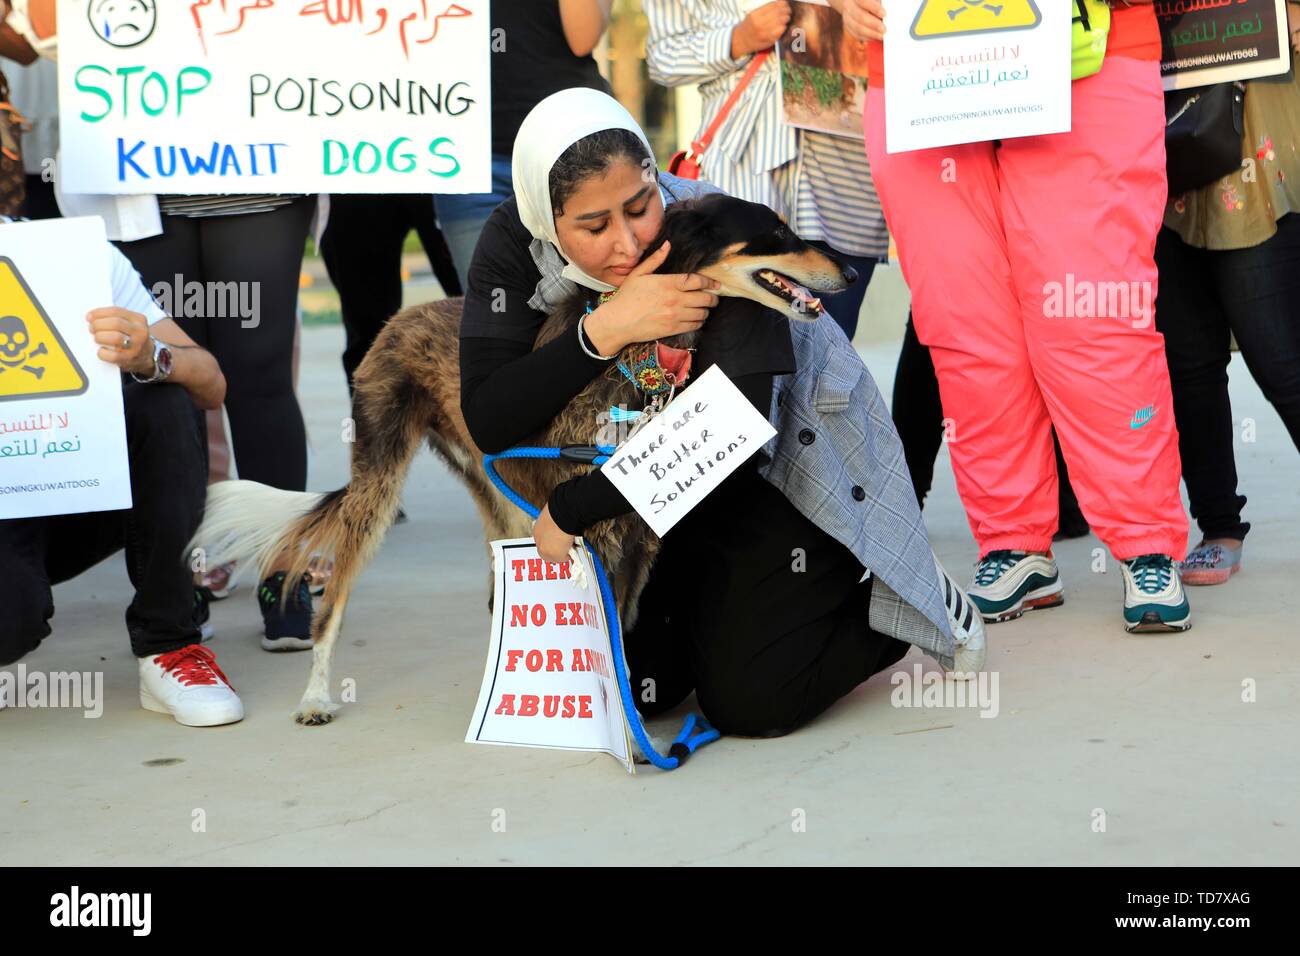 Kuwait City, Kuwait. 13th June, 2019. An animal rights activist hugs a dog during a peaceful stand in Kuwait City, Kuwait, on June 13, 2019. Dozens of Kuwaitis and animal rights activists on Thursday held a peaceful stand in Kuwait City, calling for stopping poisoning stray animals. Credit: Joseph Shagra/Xinhua/Alamy Live News Stock Photo